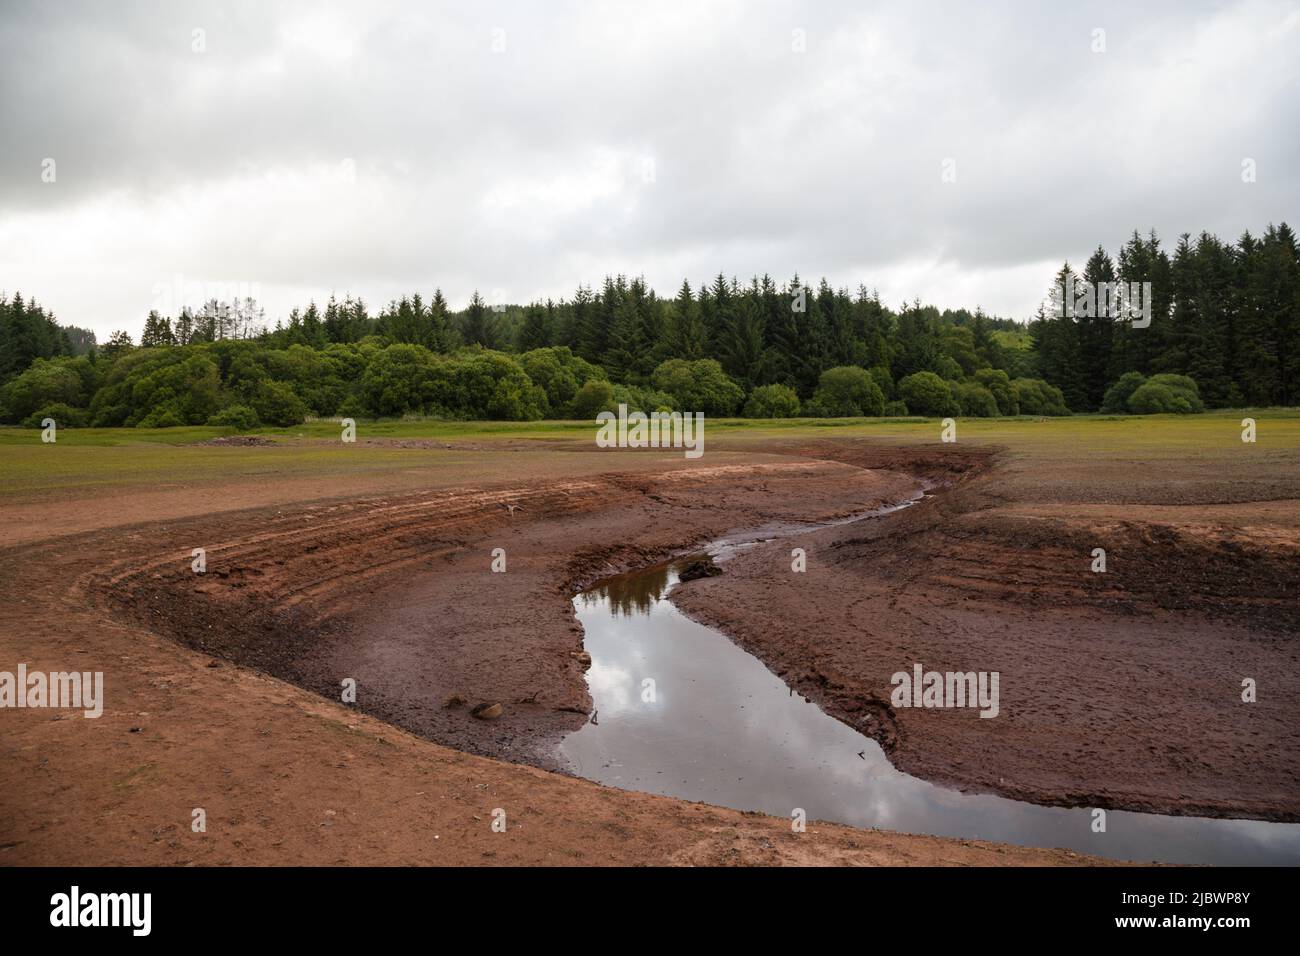 Llwyn Onn Reservoir, South Wales. UK.  8 June 2022.  UK weather:  Lower water levels than normal this afternoon, with parts of the reservoir drying up.  An old bridge has been uncovered, which was in use before the reservoir was constructed, Pont Yr Daf.  Credit: Andrew Bartlett/Alamy Live News. Stock Photo